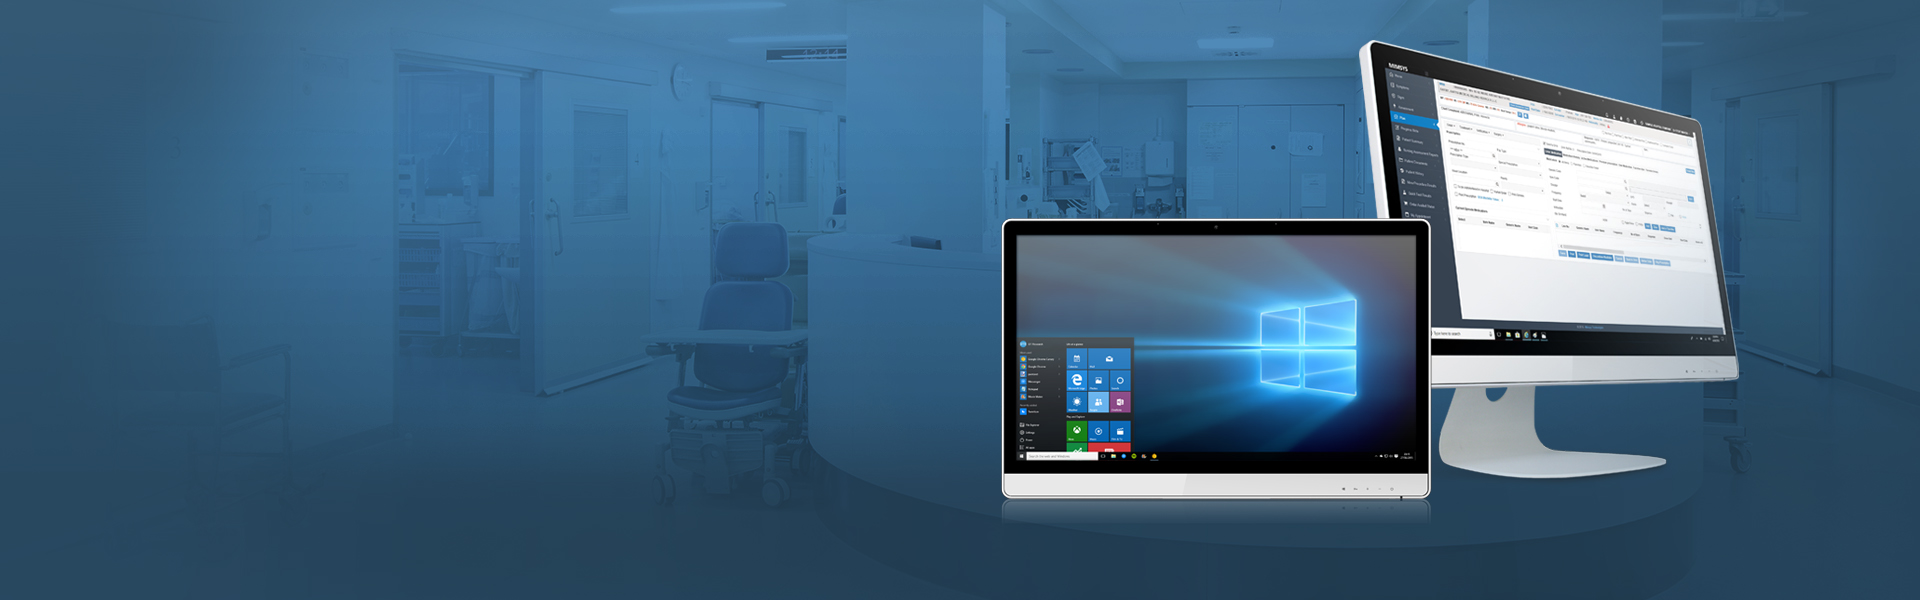 504T Medical All-in-one Computers